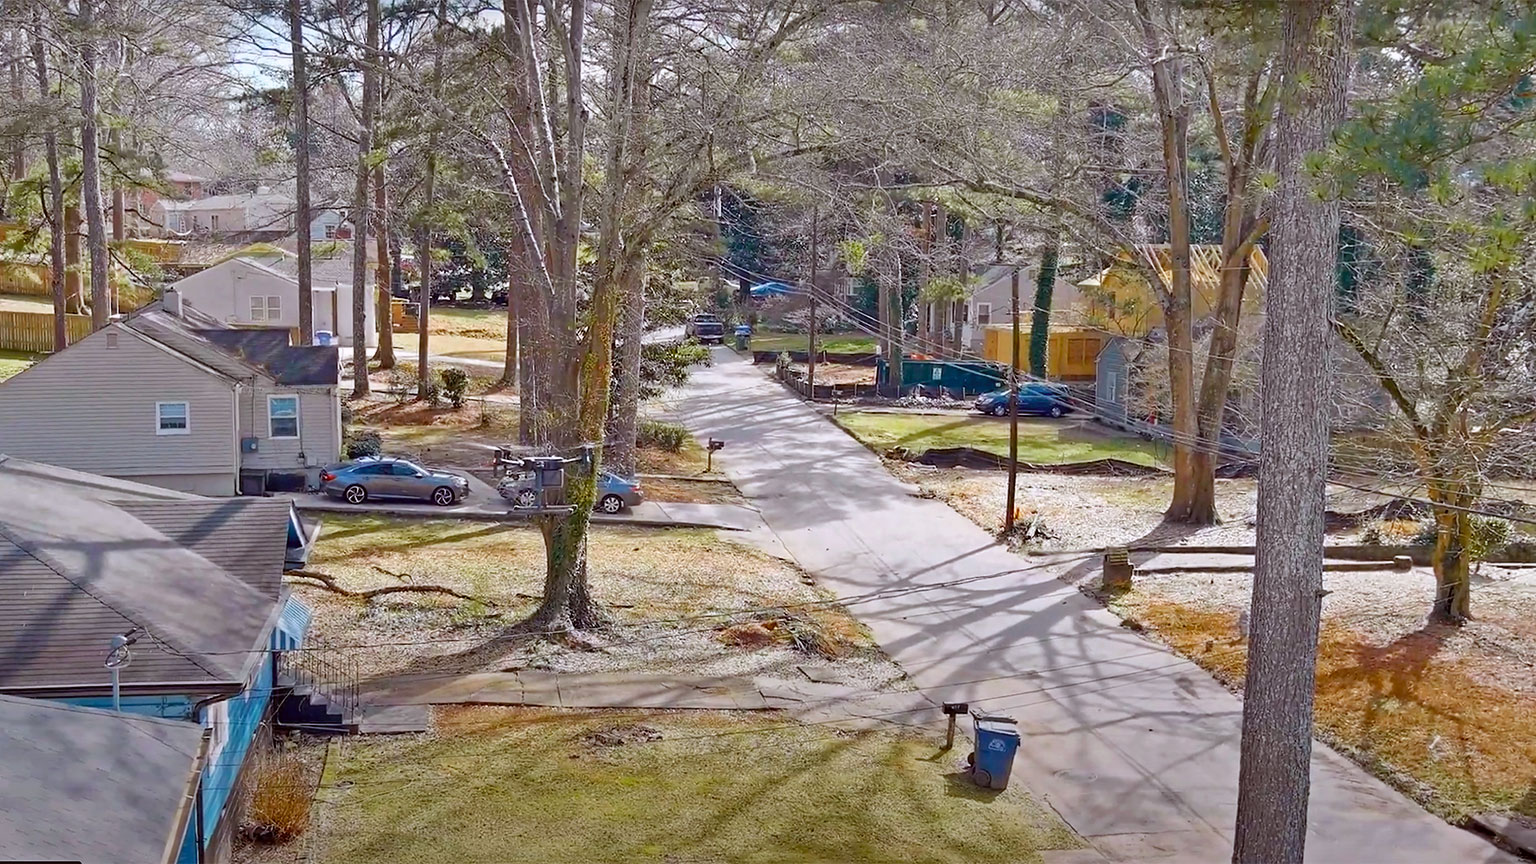 Drone photograph of houses along a street in Grove Park